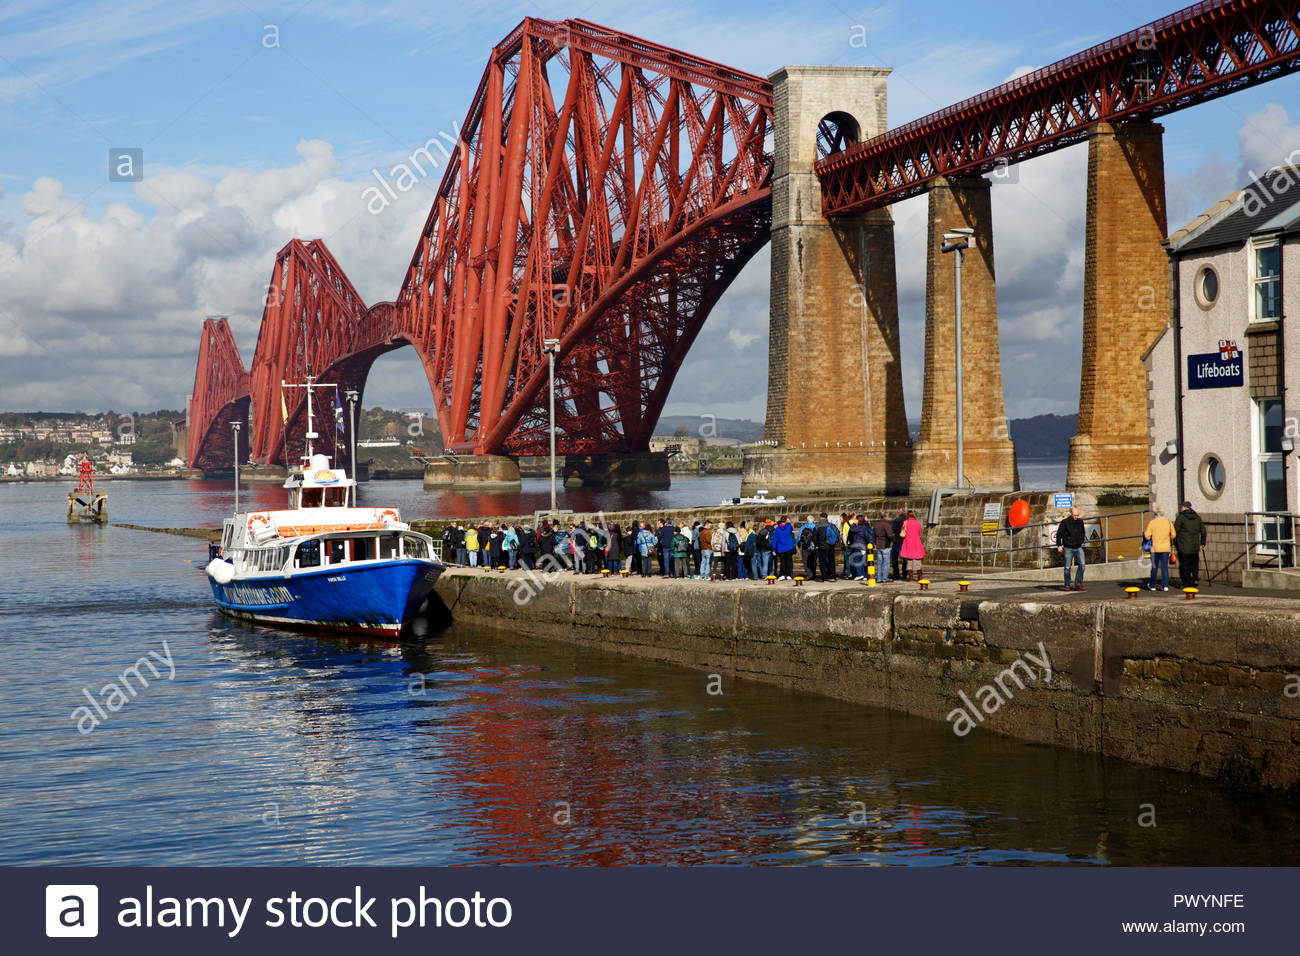 Tourists queueing at the Forth Bridge to join the Forth Belle Boat tour of the Forth Estuary and islands at South Queensferry, Scotland Stock Photo